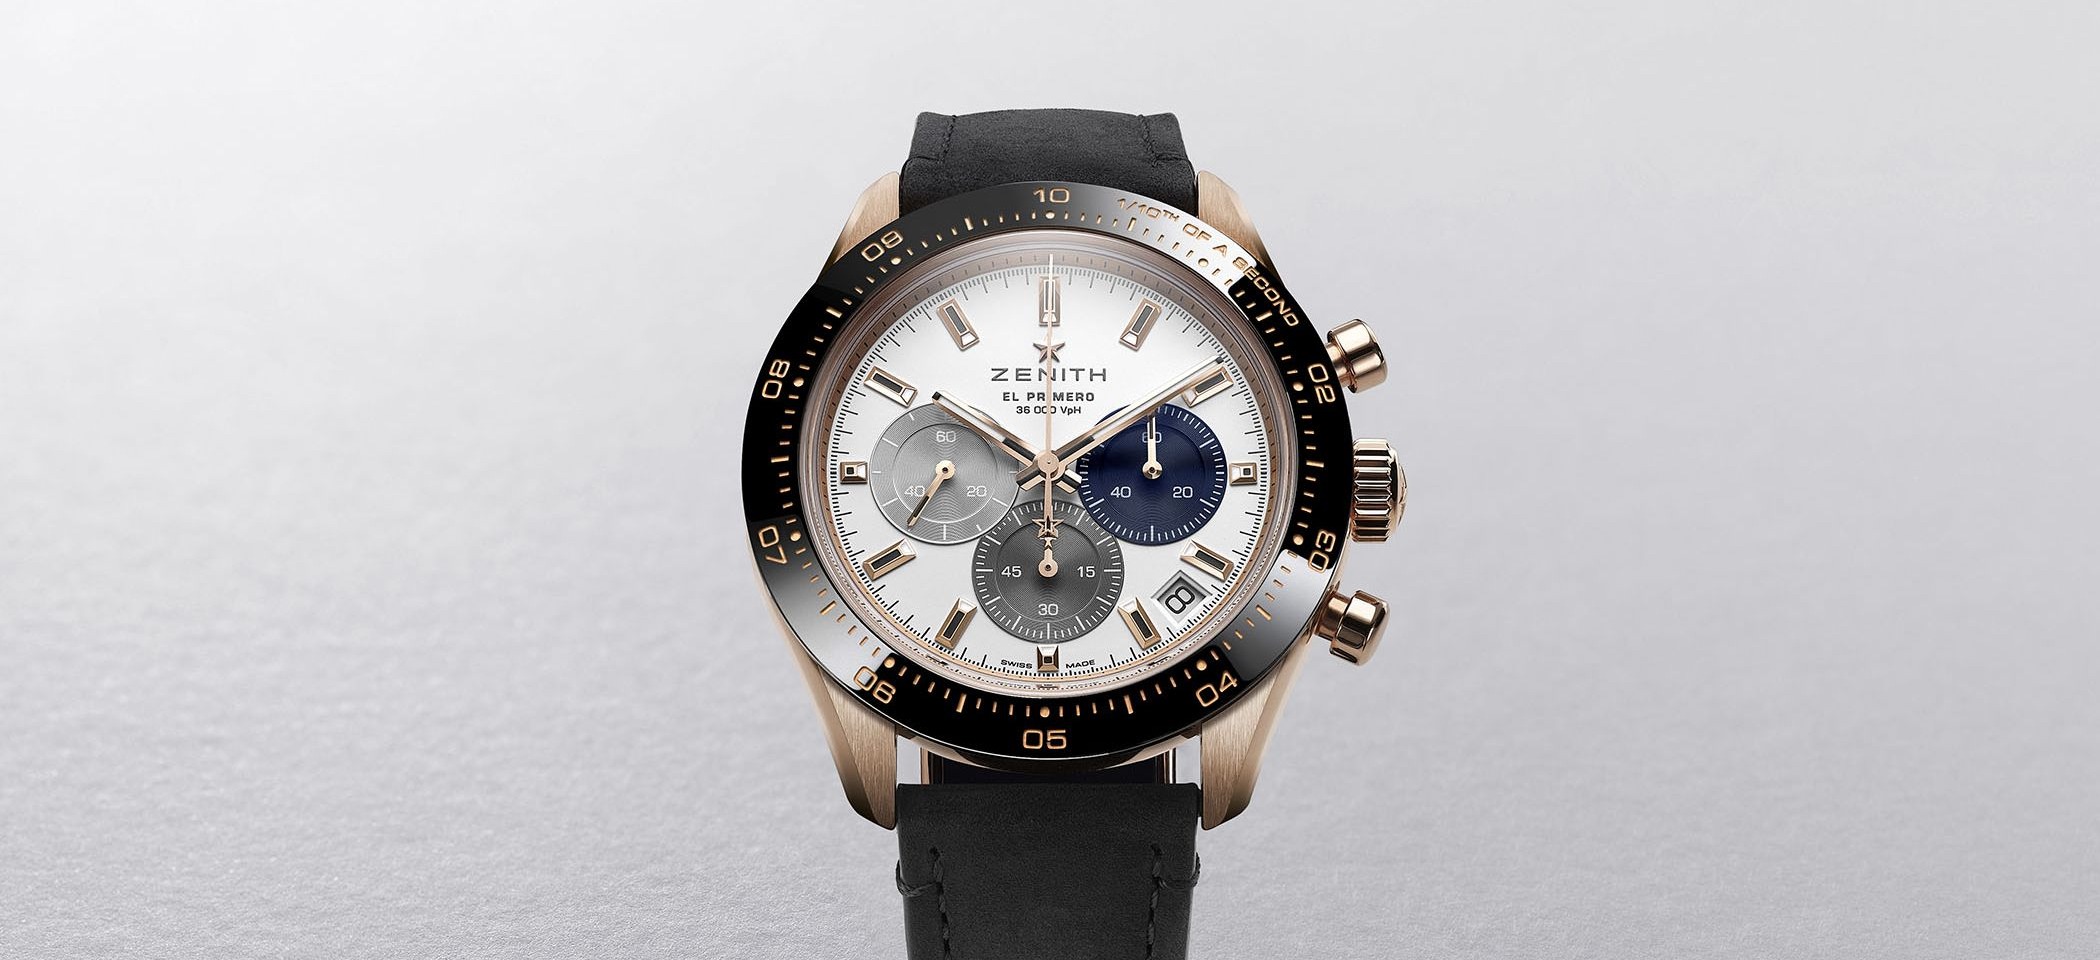 Zenith Chronomaster Sport in Rose Gold: Zenith’s Chronograph Hit in a Lustrous New Gold Case